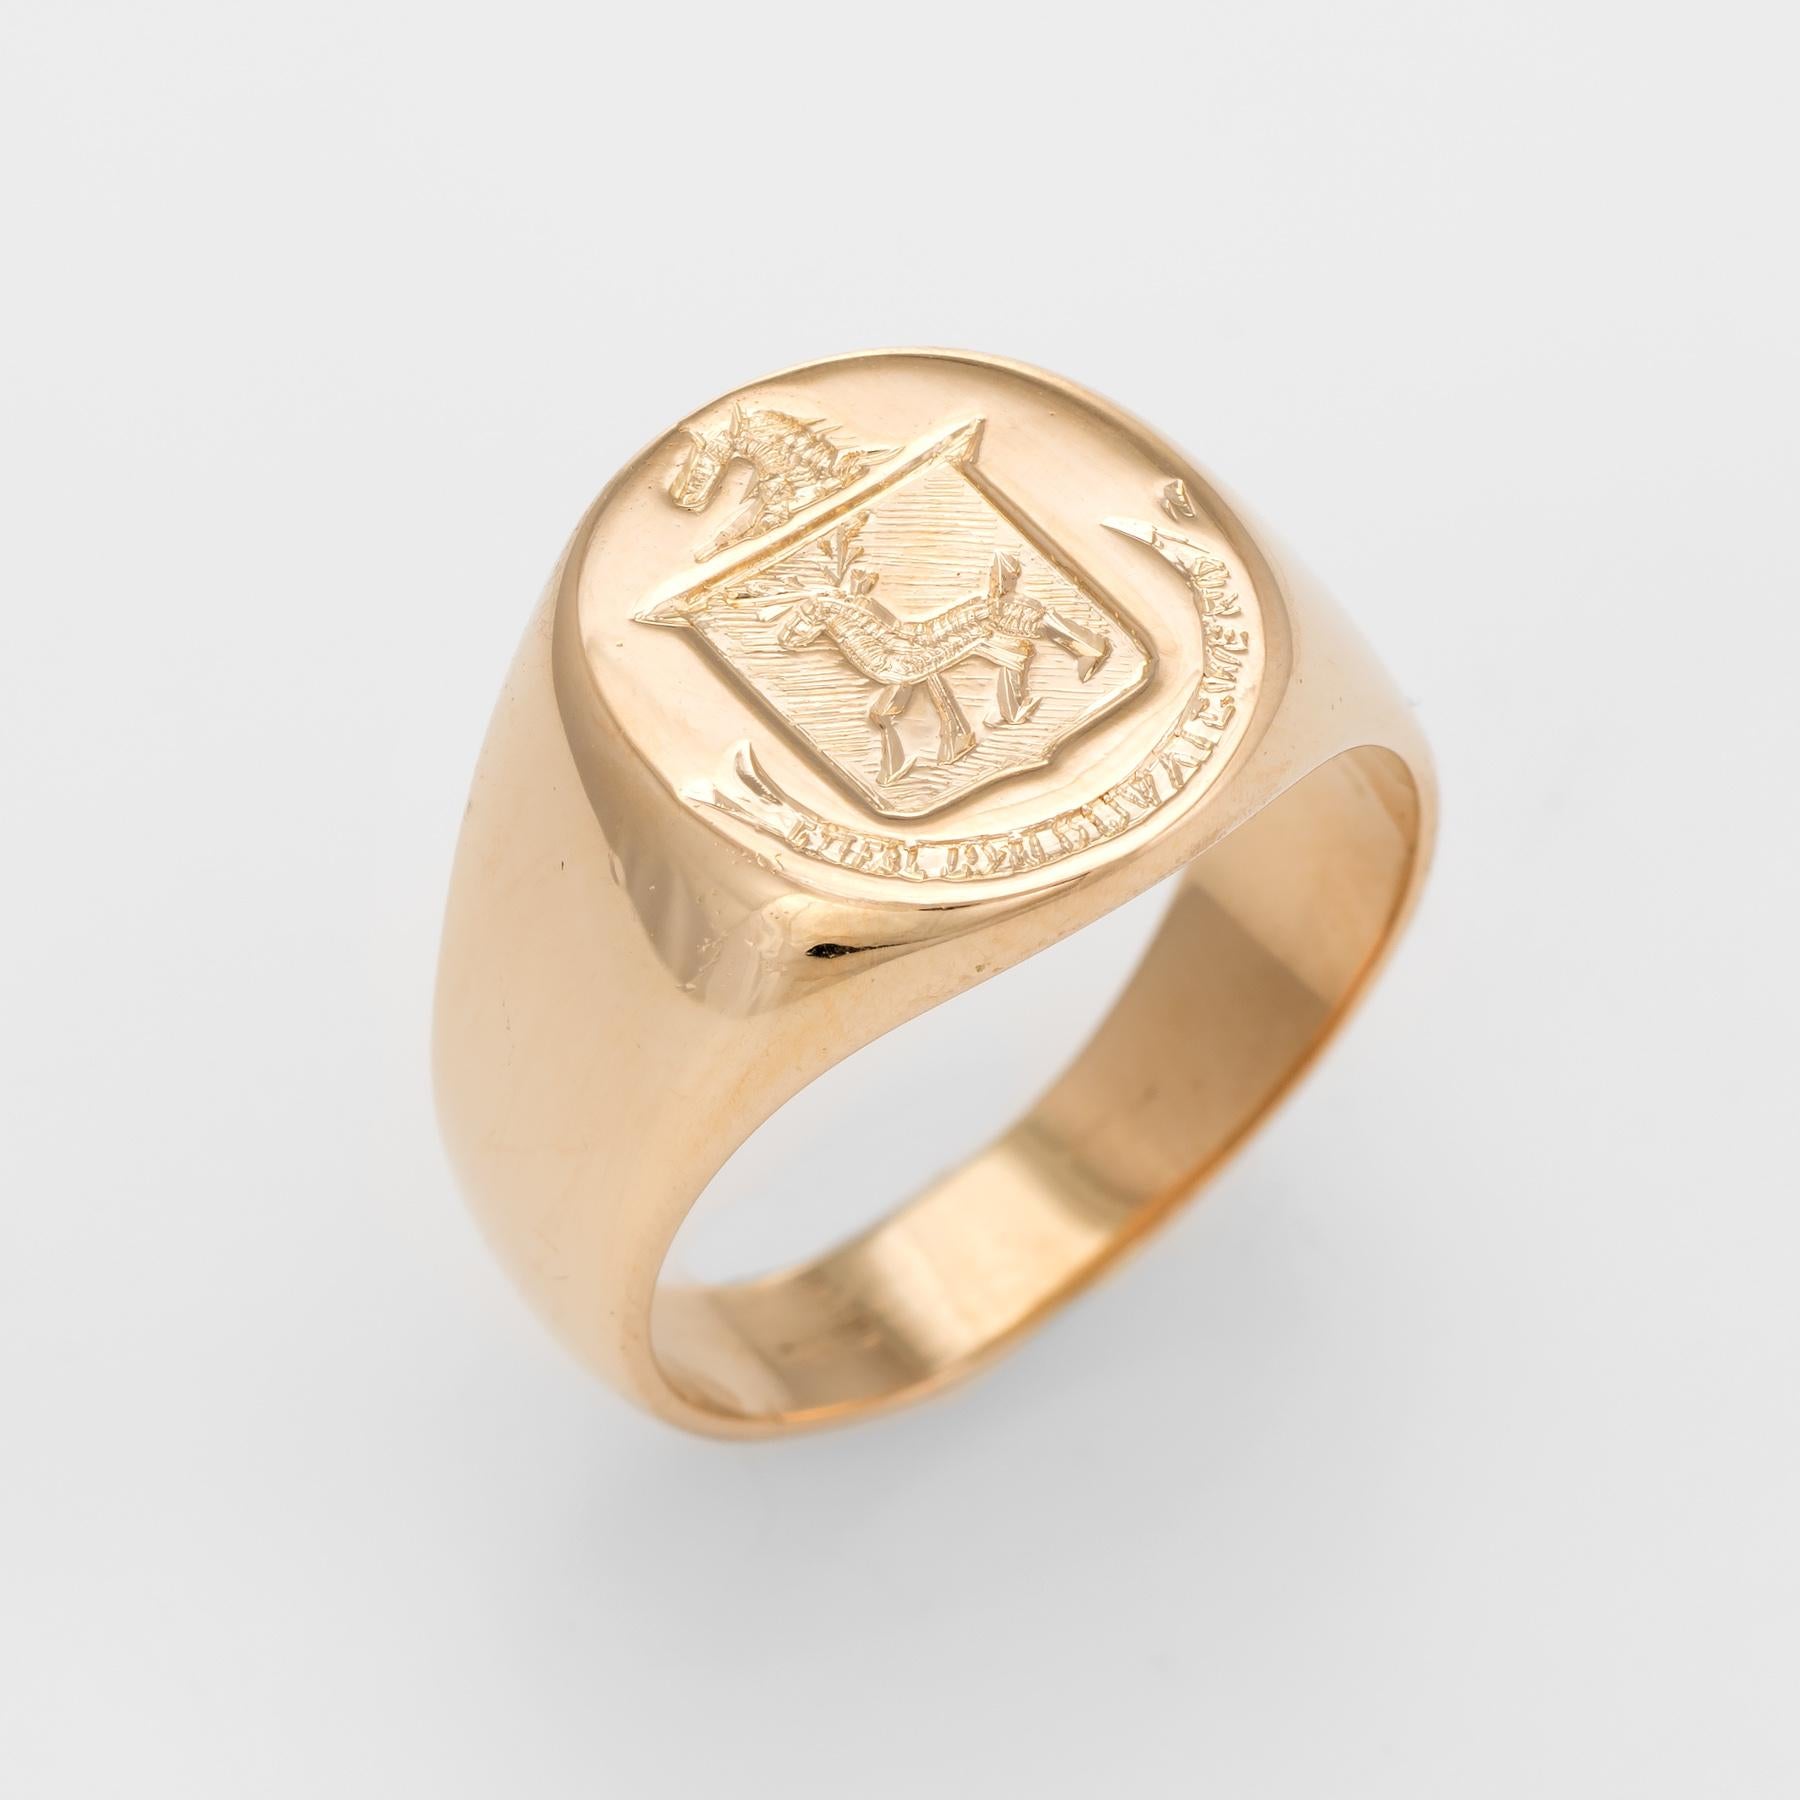 Finely detailed Men's signet ring (circa 1960s to 1970s), crafted in 18 karat yellow gold. 
Estate Jewelry Heirloom 8

The mount features a family crest with a deer in the center. The surrounding script is very hard to read (we believe it is Latin)